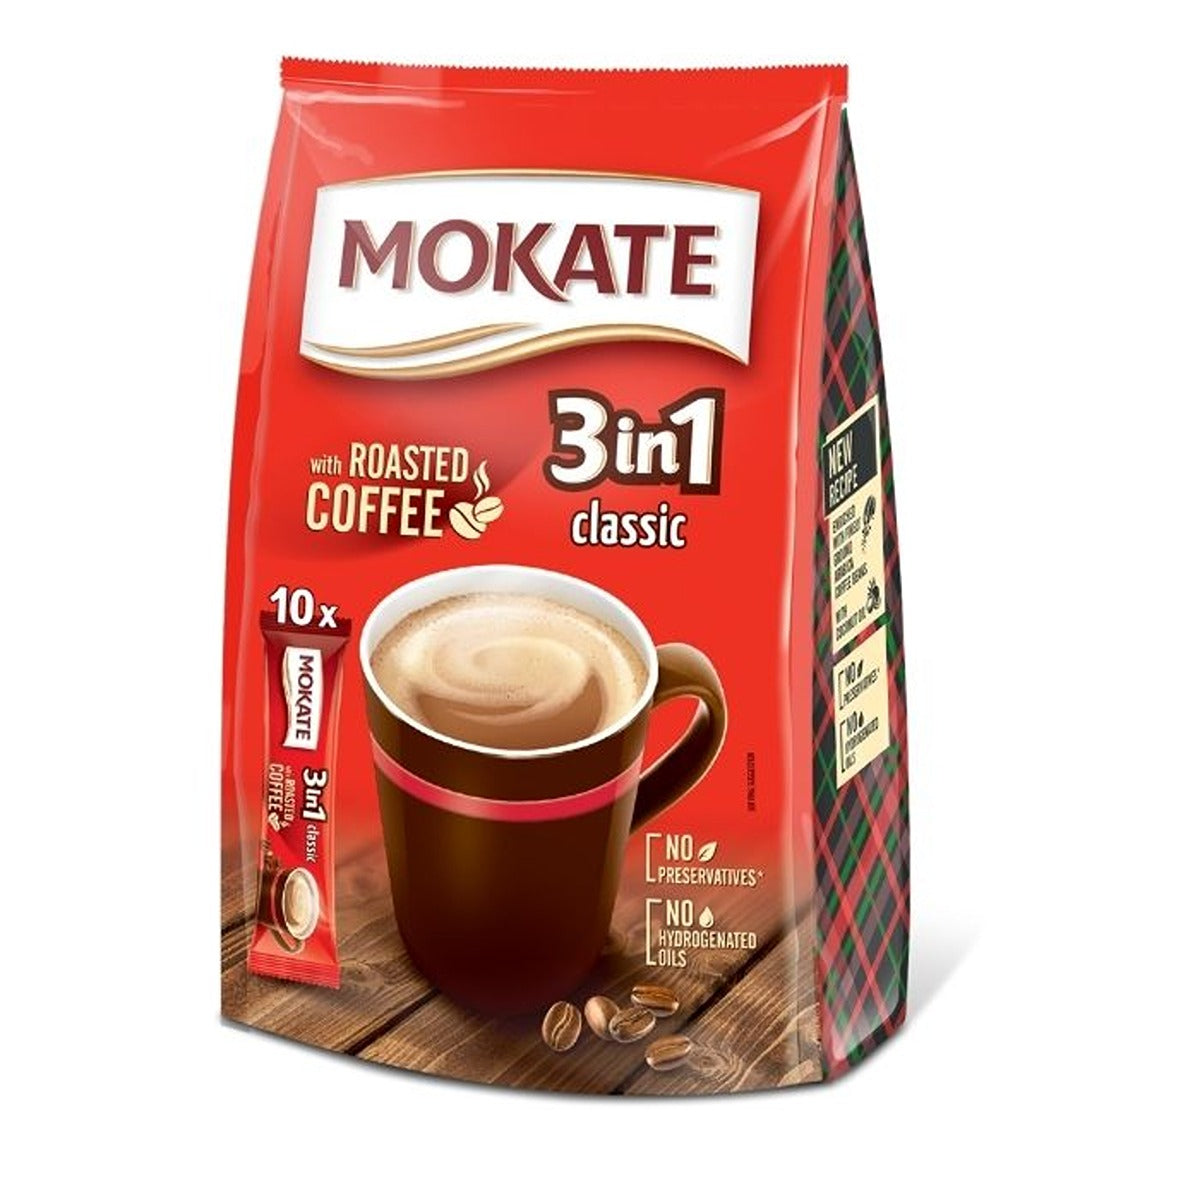 Mokate - 3 in 1 Classic - 10 Pack coffee.